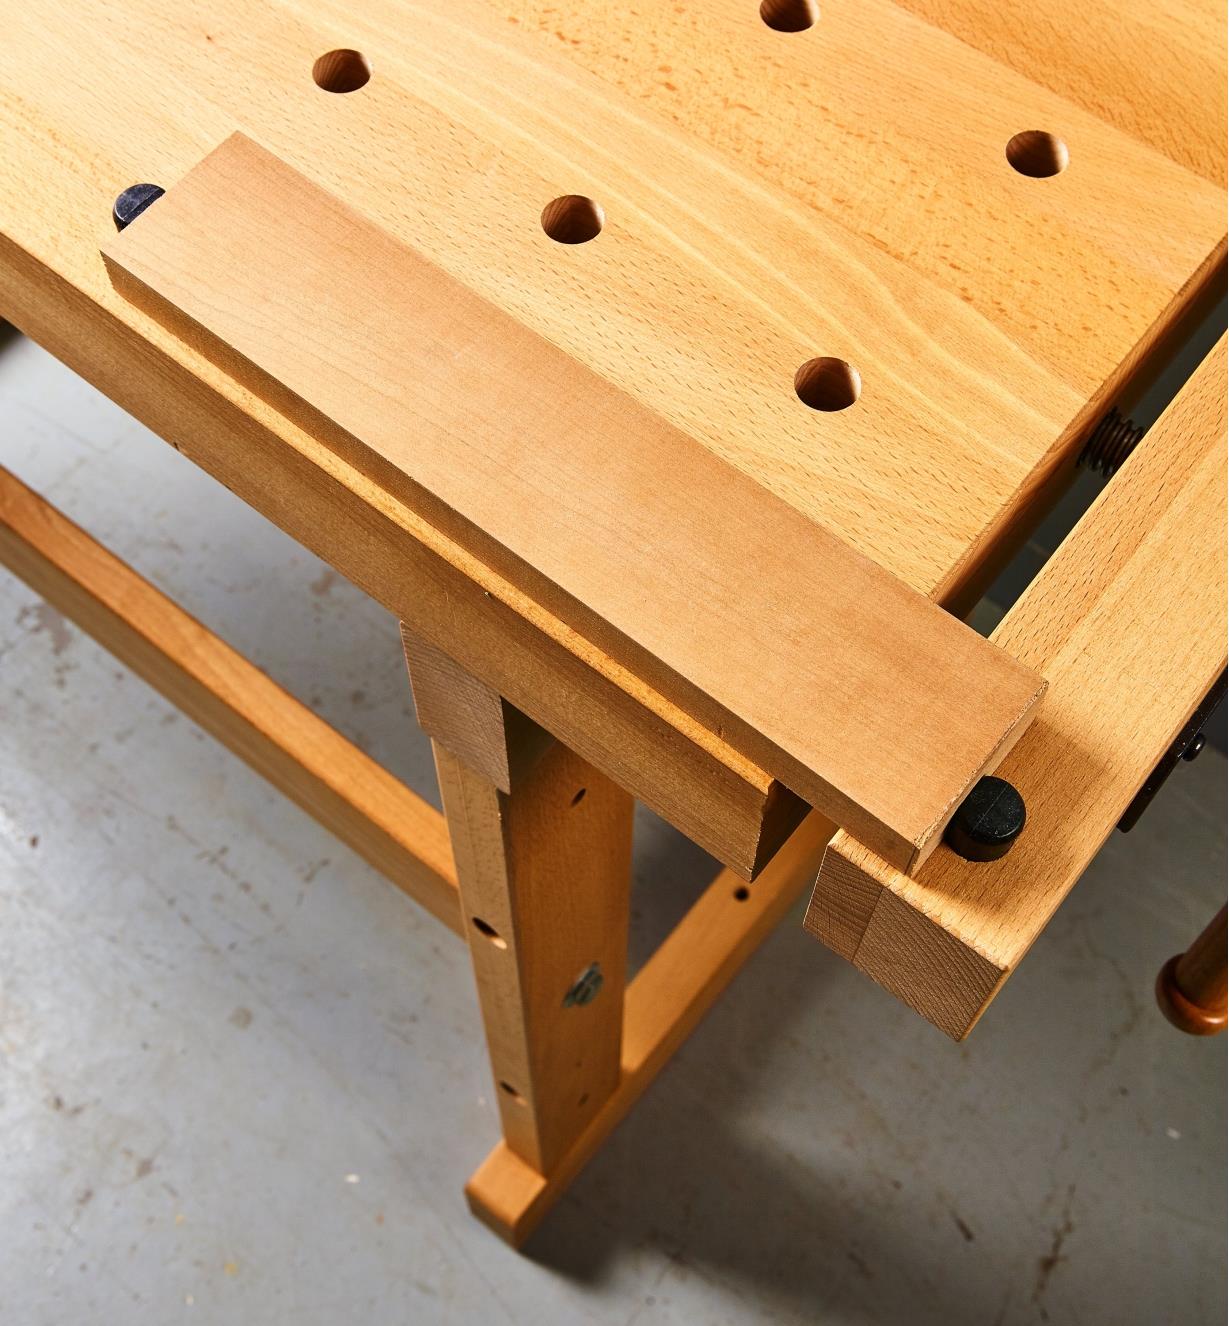 A block of wood clamped using dog holes in the vise and bench top